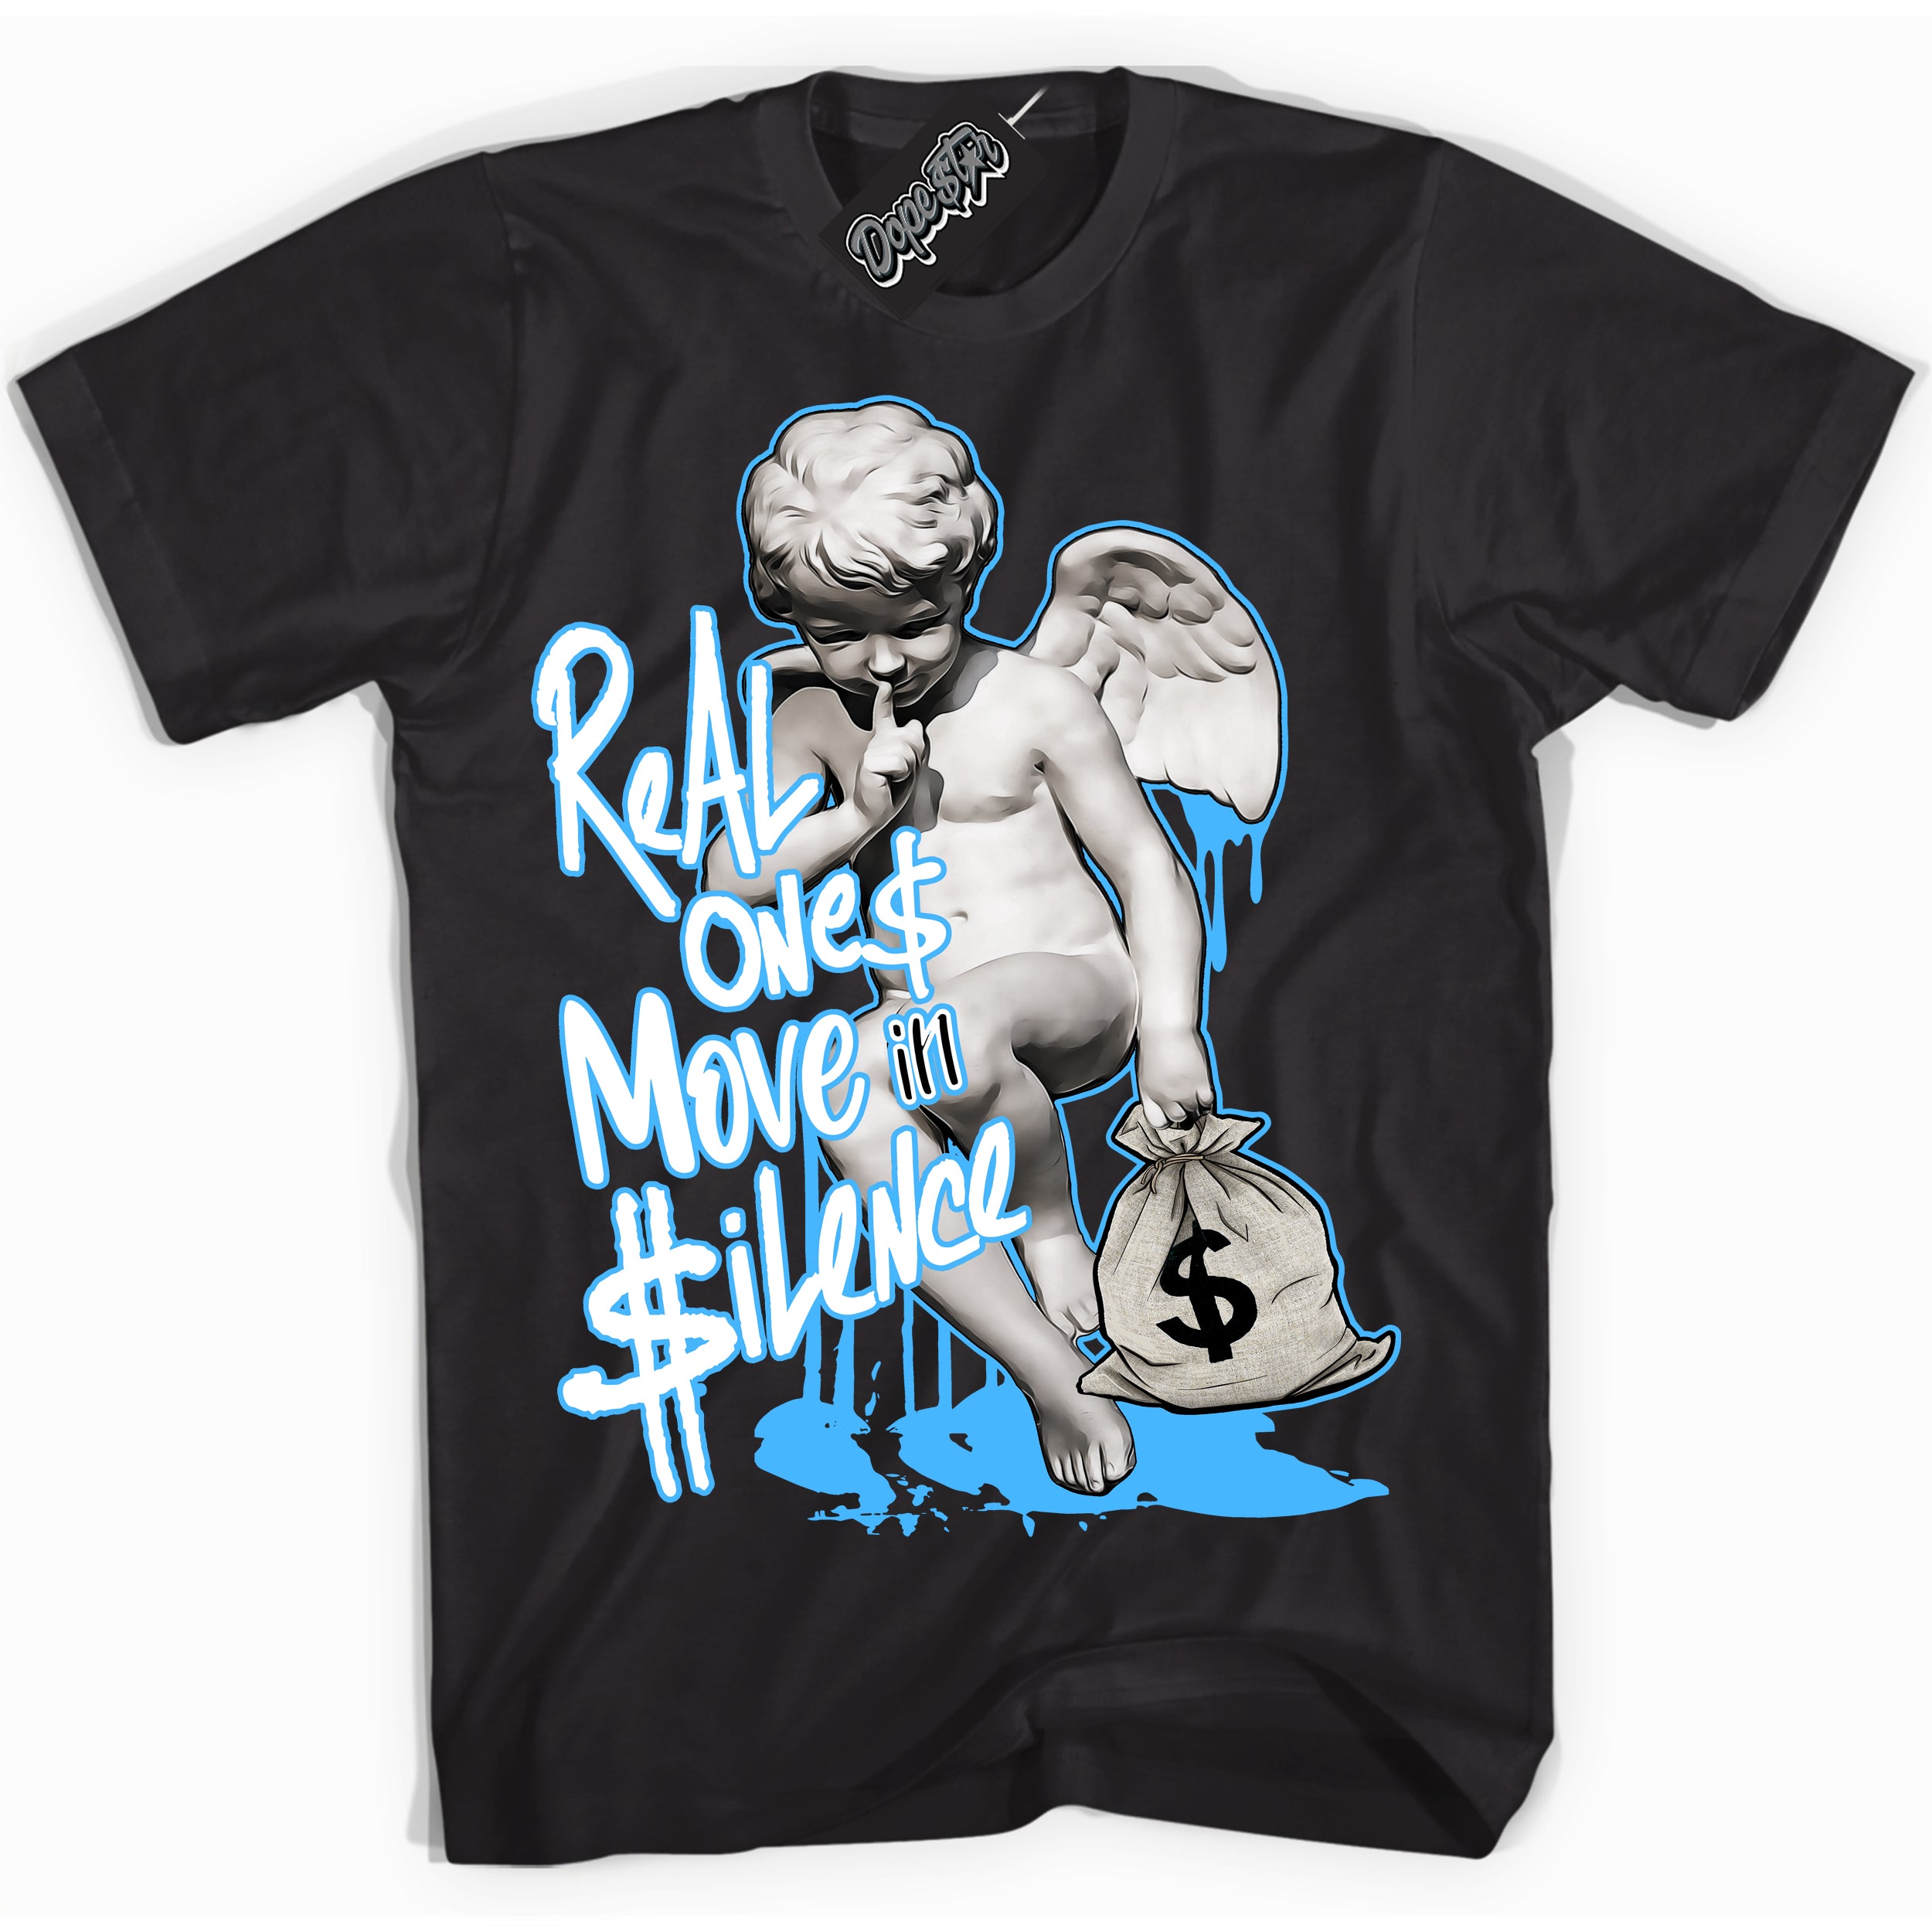 Cool Black graphic tee with “ Real Ones Cherub ” design, that perfectly matches Powder Blue 9s sneakers 